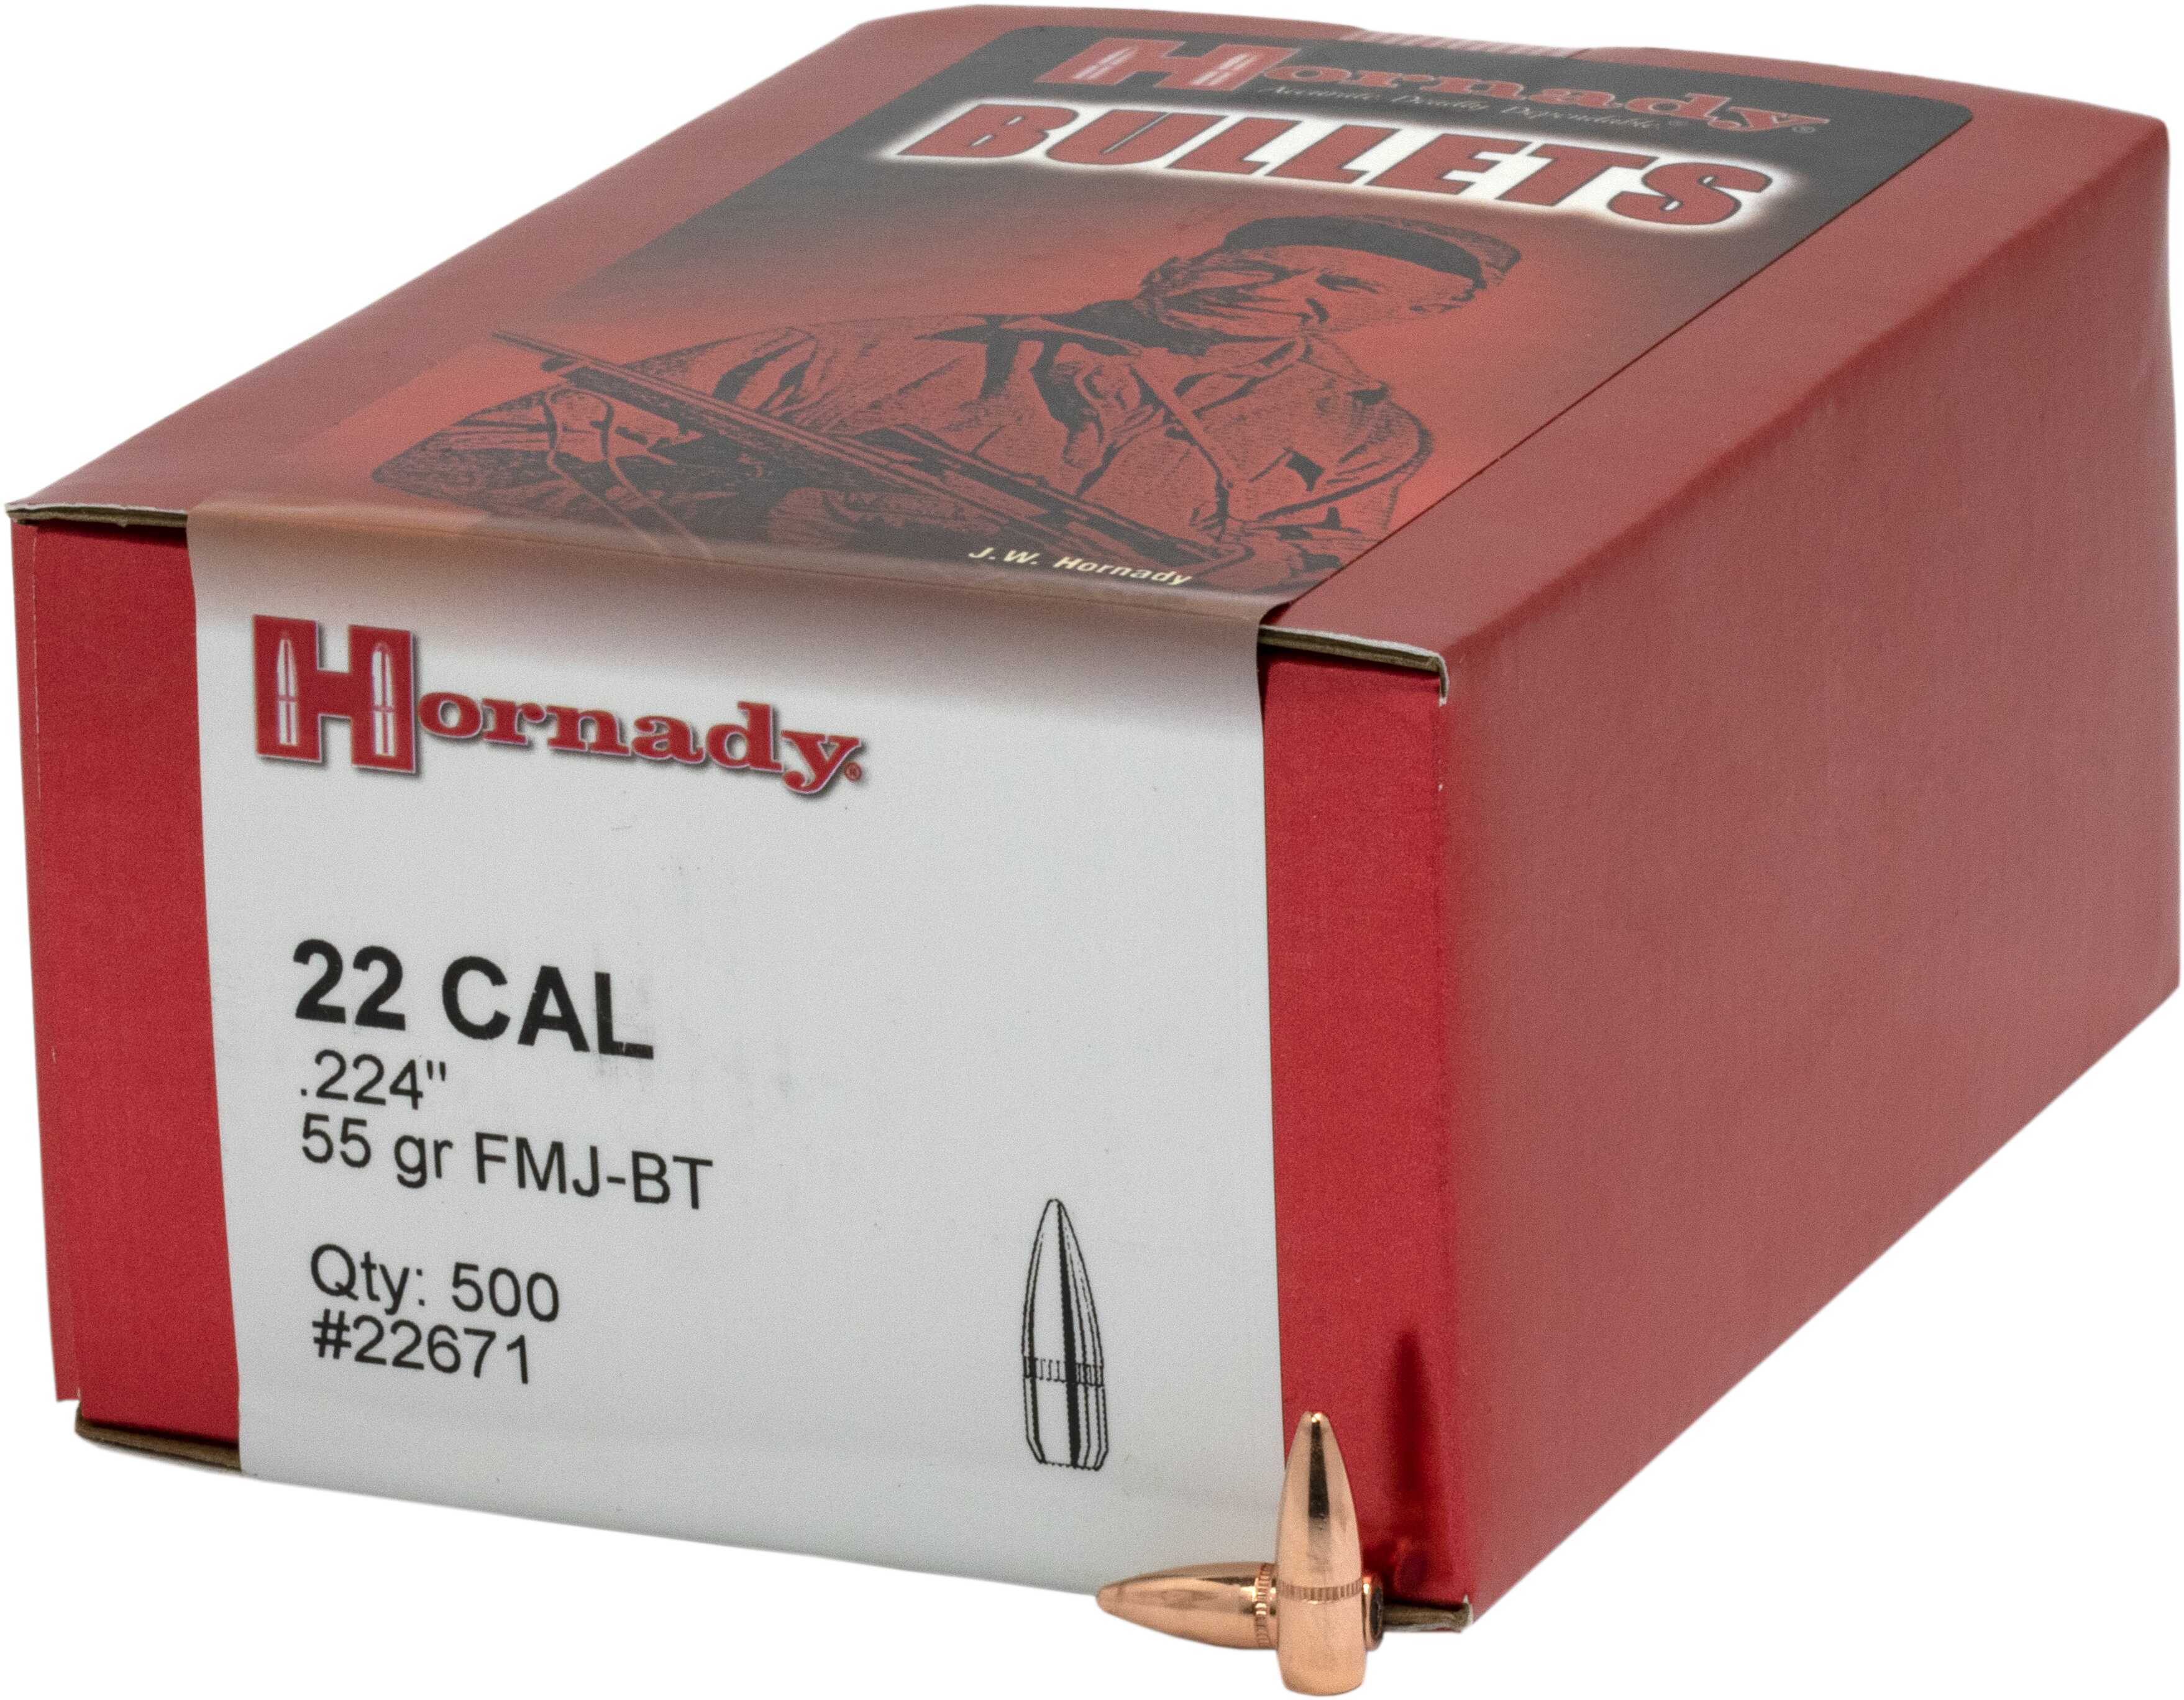 Hornady 22 Caliber Bullets (.224 Diameter) 55 Grains, Full Metal Jacket Boat Tail with Cannelure, Per 500 Md